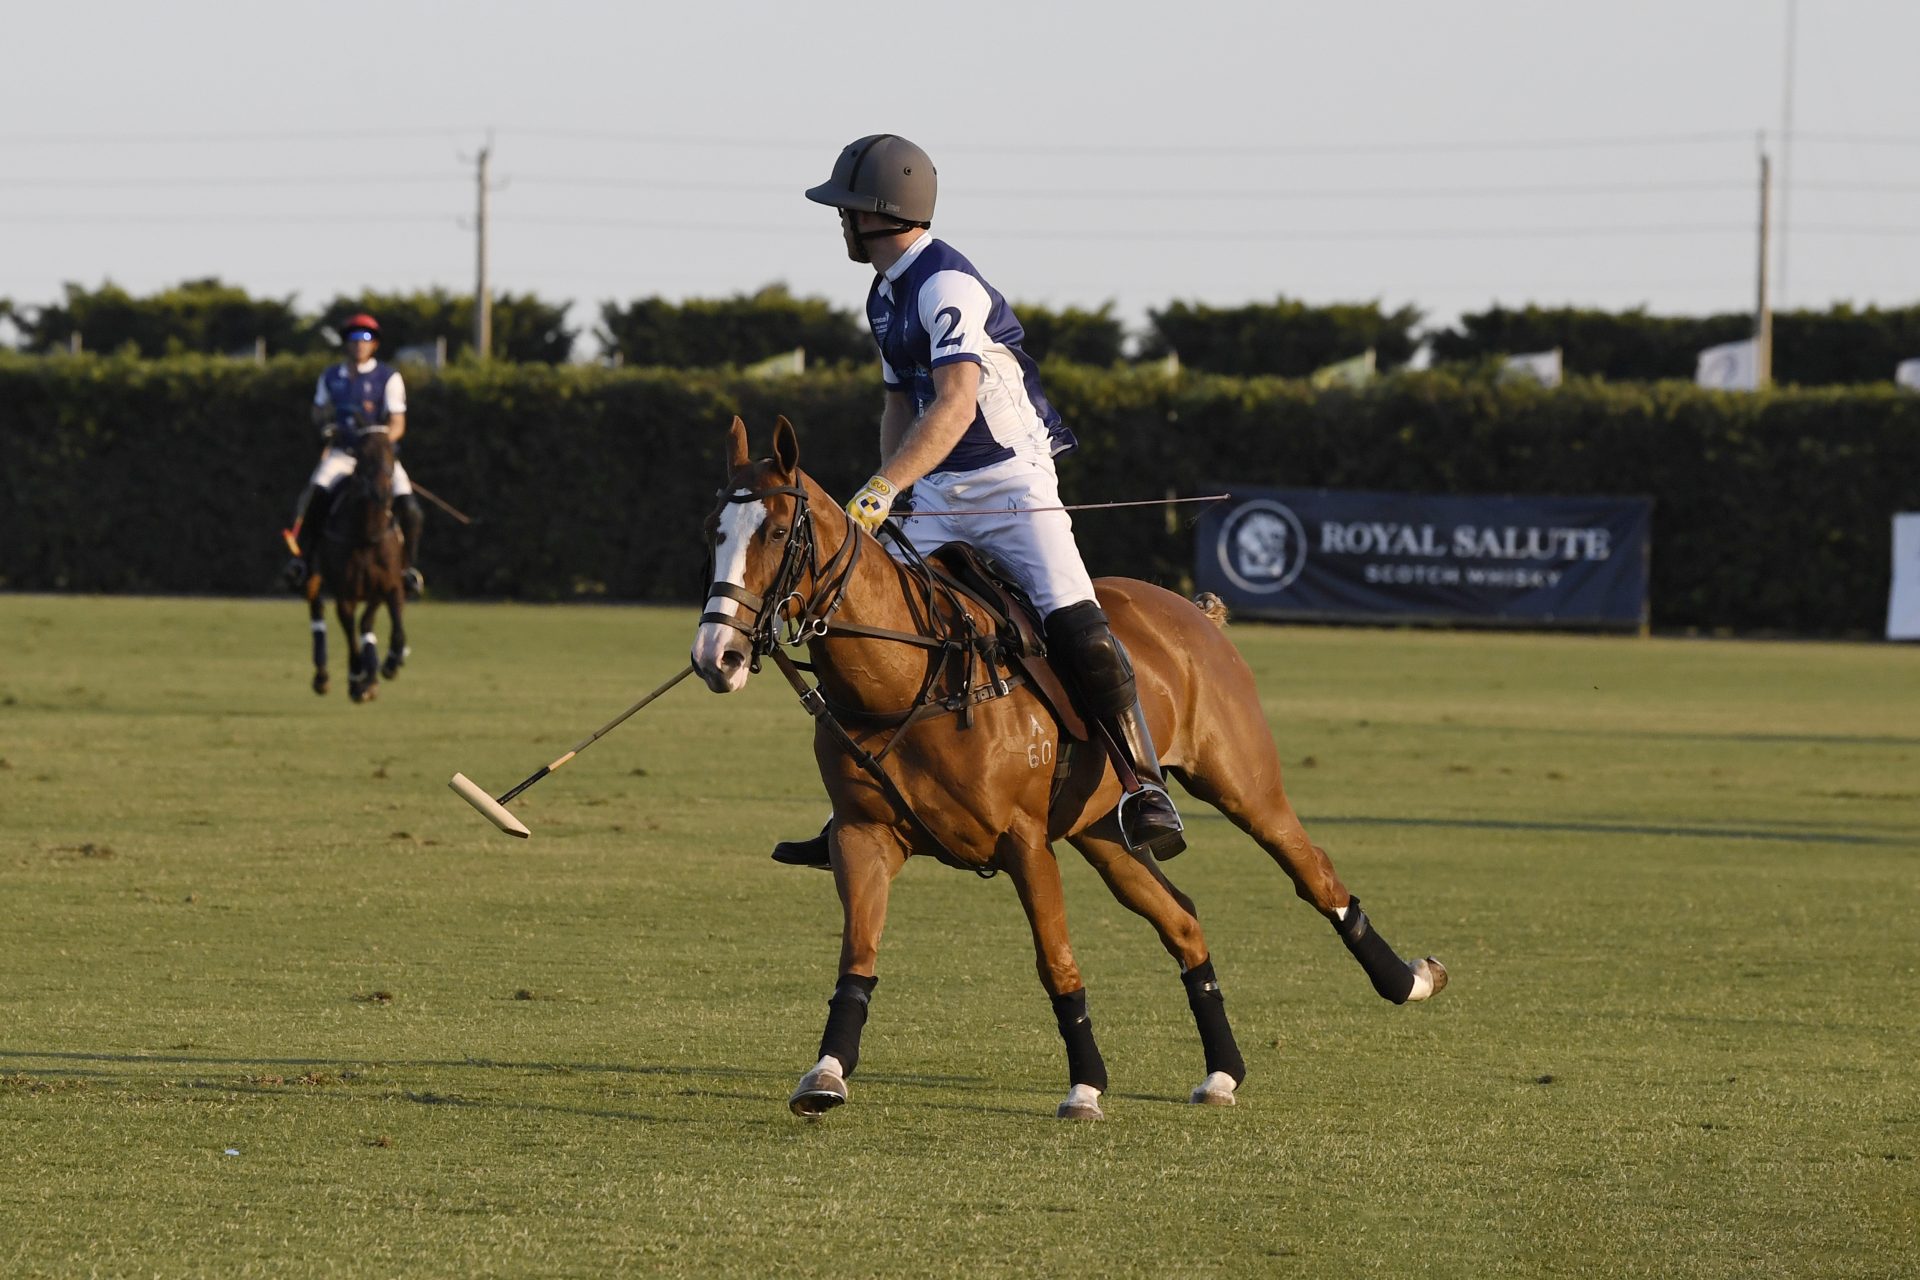 The world of professional polo